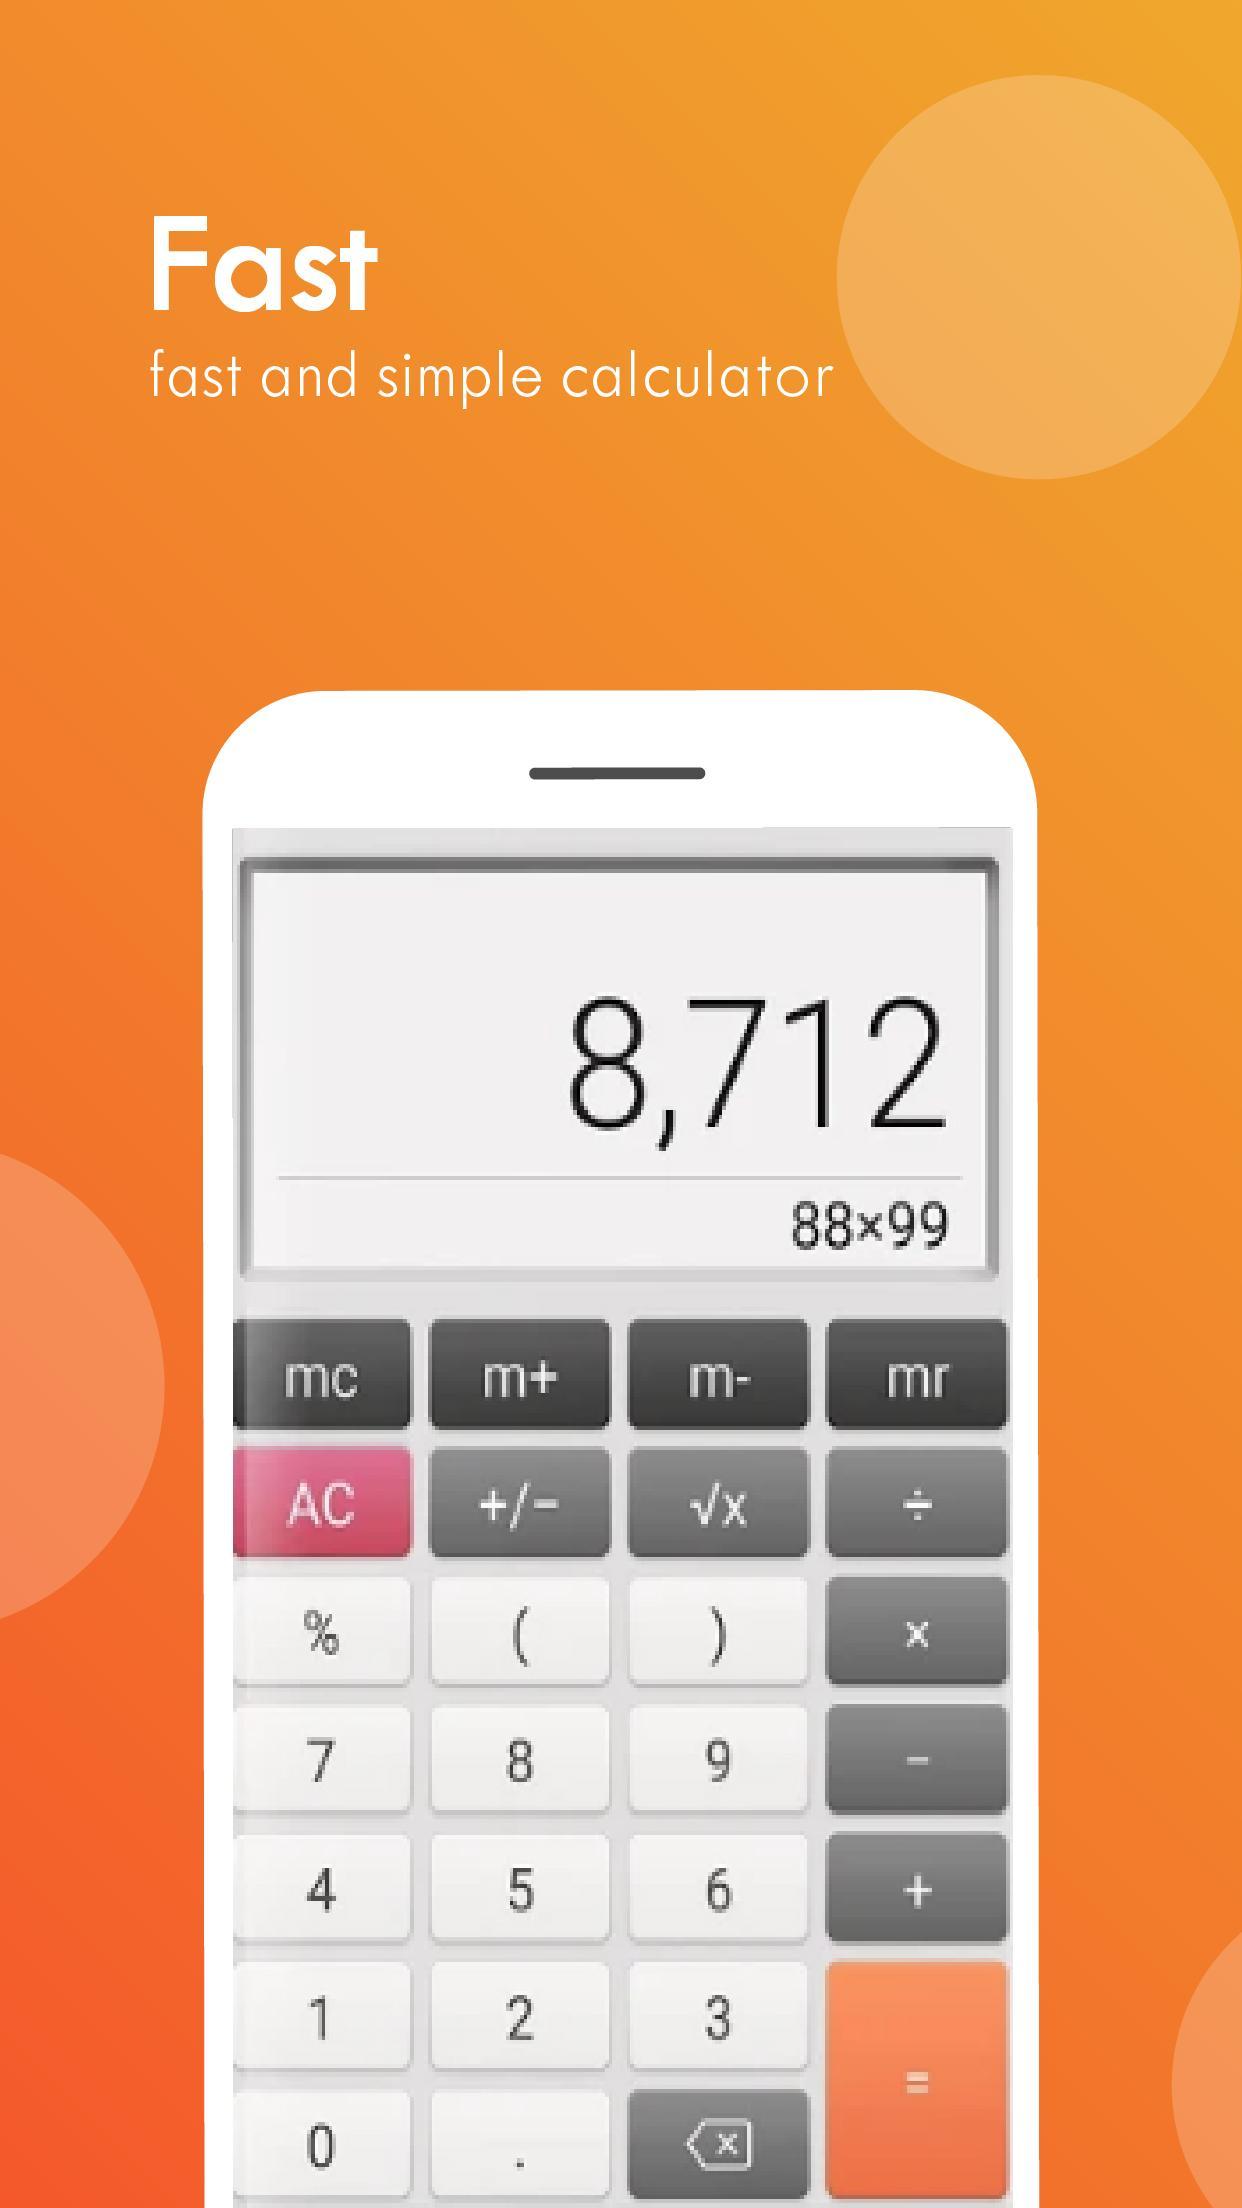 Super Calculator-Solve Math Problems By Camera For Android - Apk Download